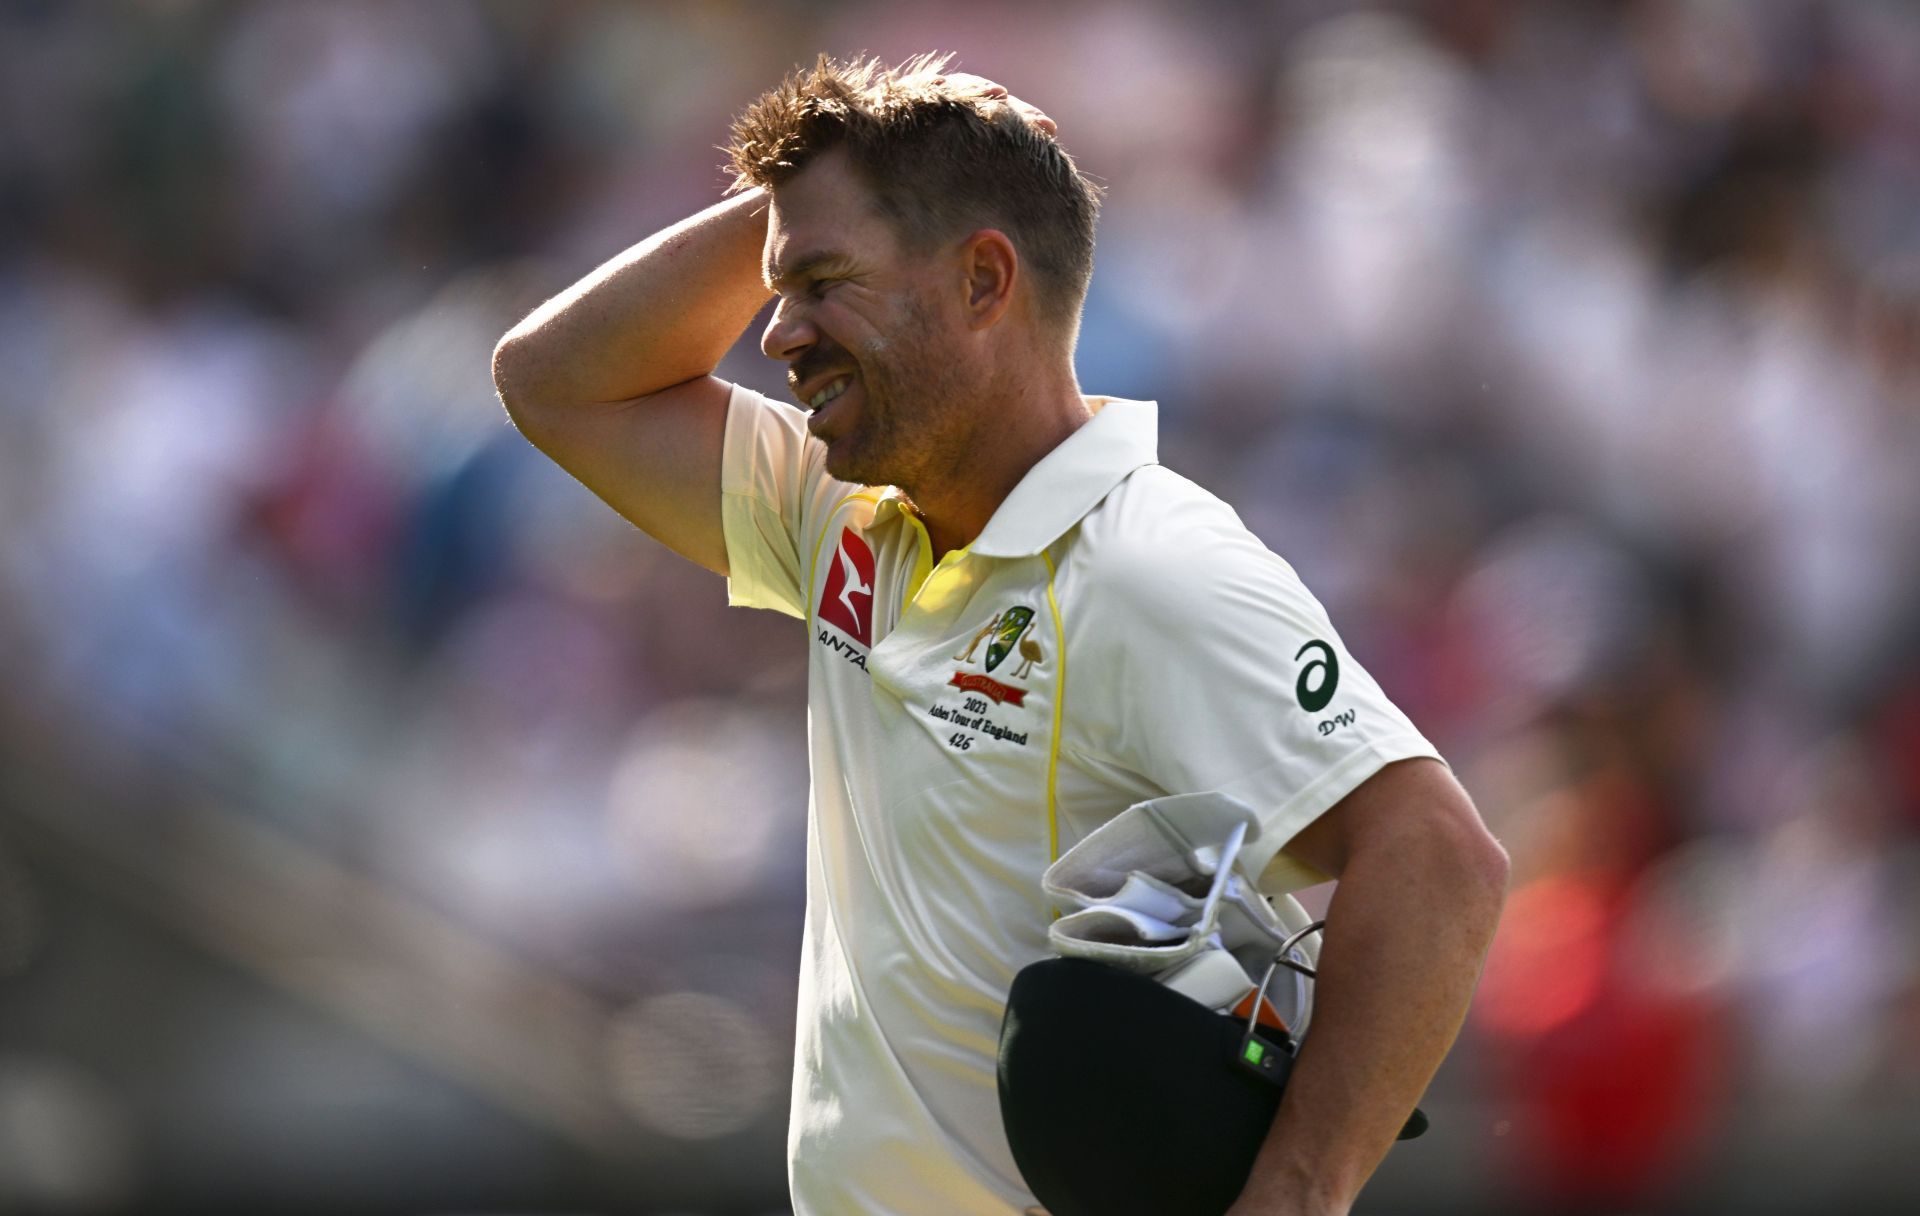 Time might be running out for Warner as far as his Test career is concerned